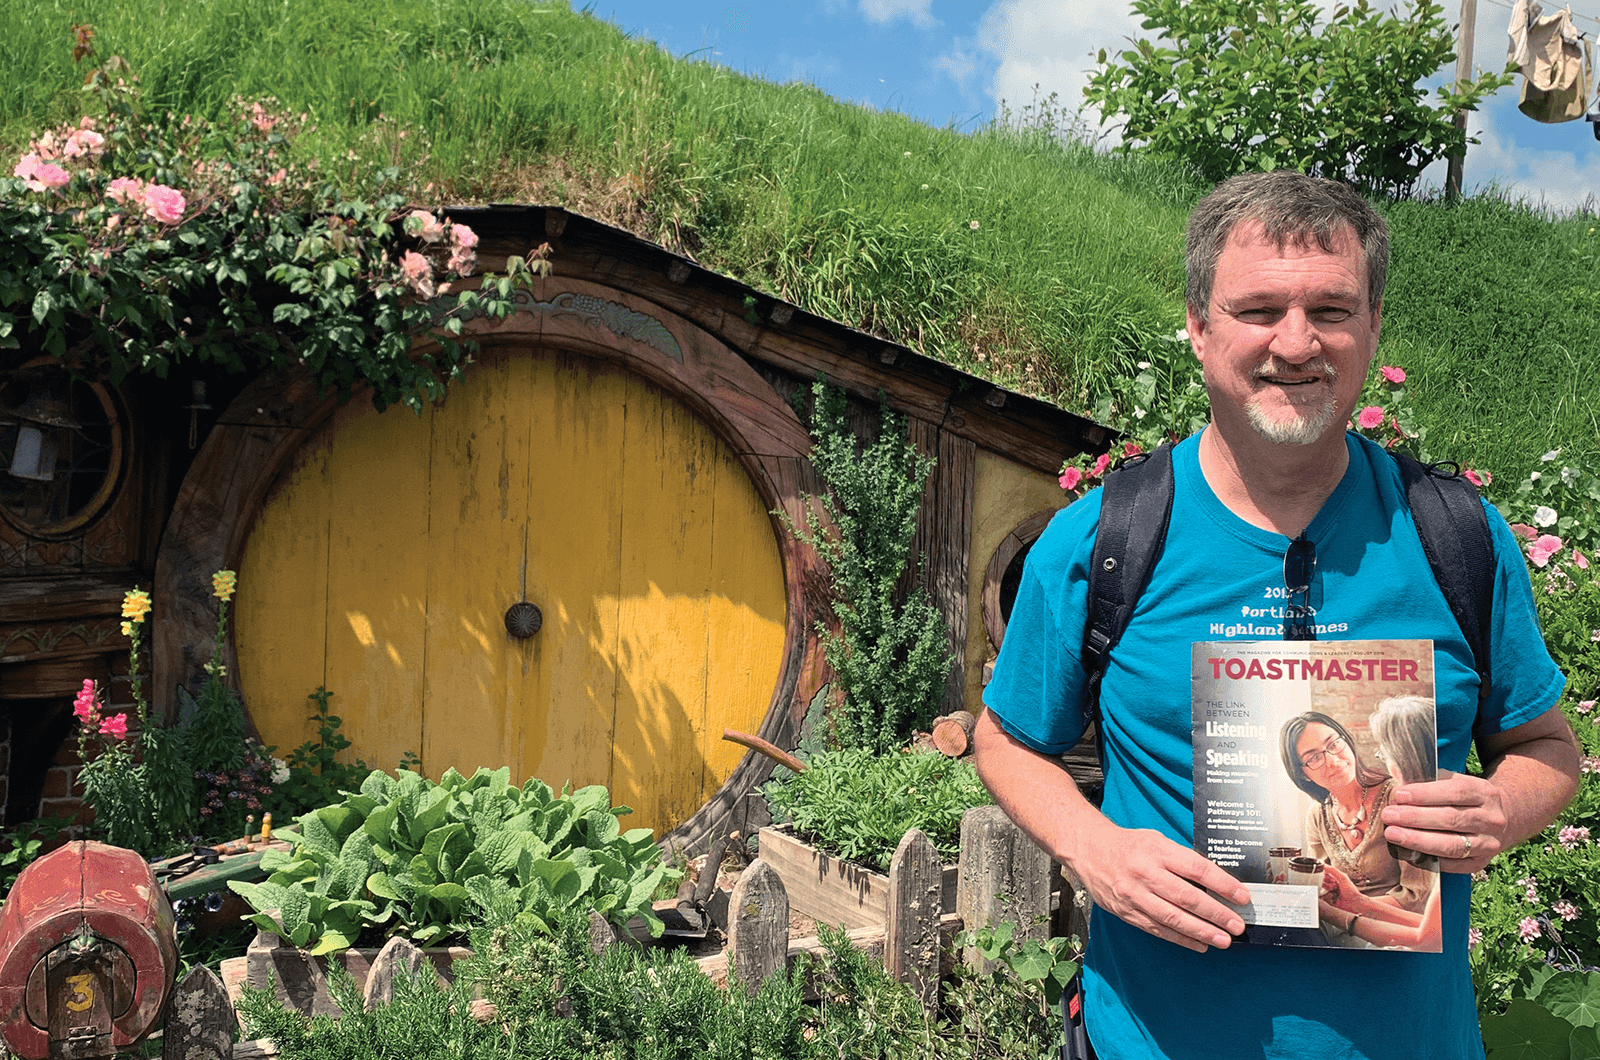 Daniel Goodrich, DTM, of Vancouver, Washington, visits the imaginary land of Hobbiton—the movie set featured in The Lord of the Rings and The Hobbit trilogies in Matamata, New Zealand.